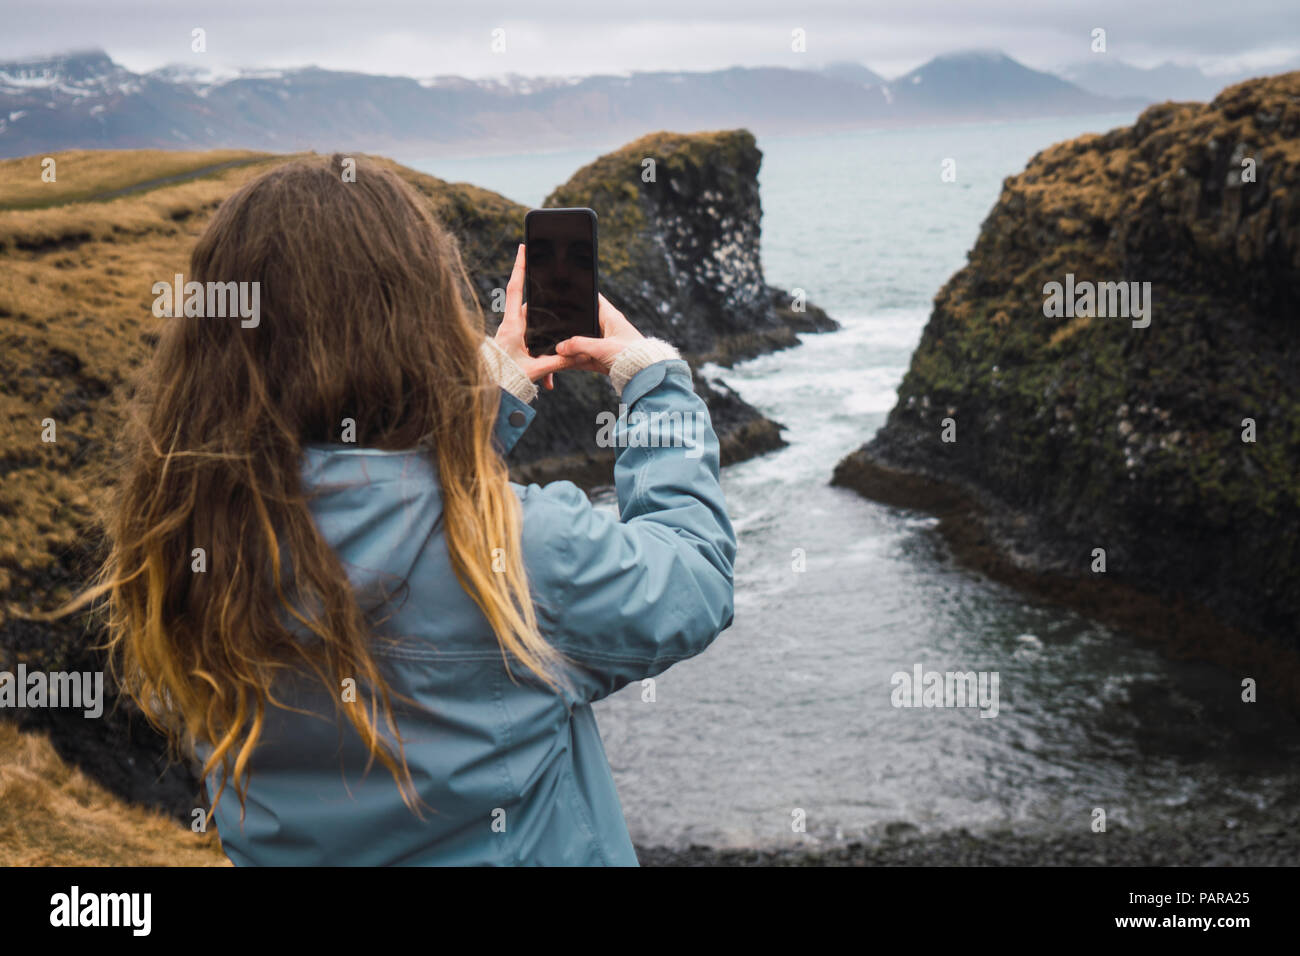 Iceland, back view of young woman taking picture with smartphone at coast Stock Photo